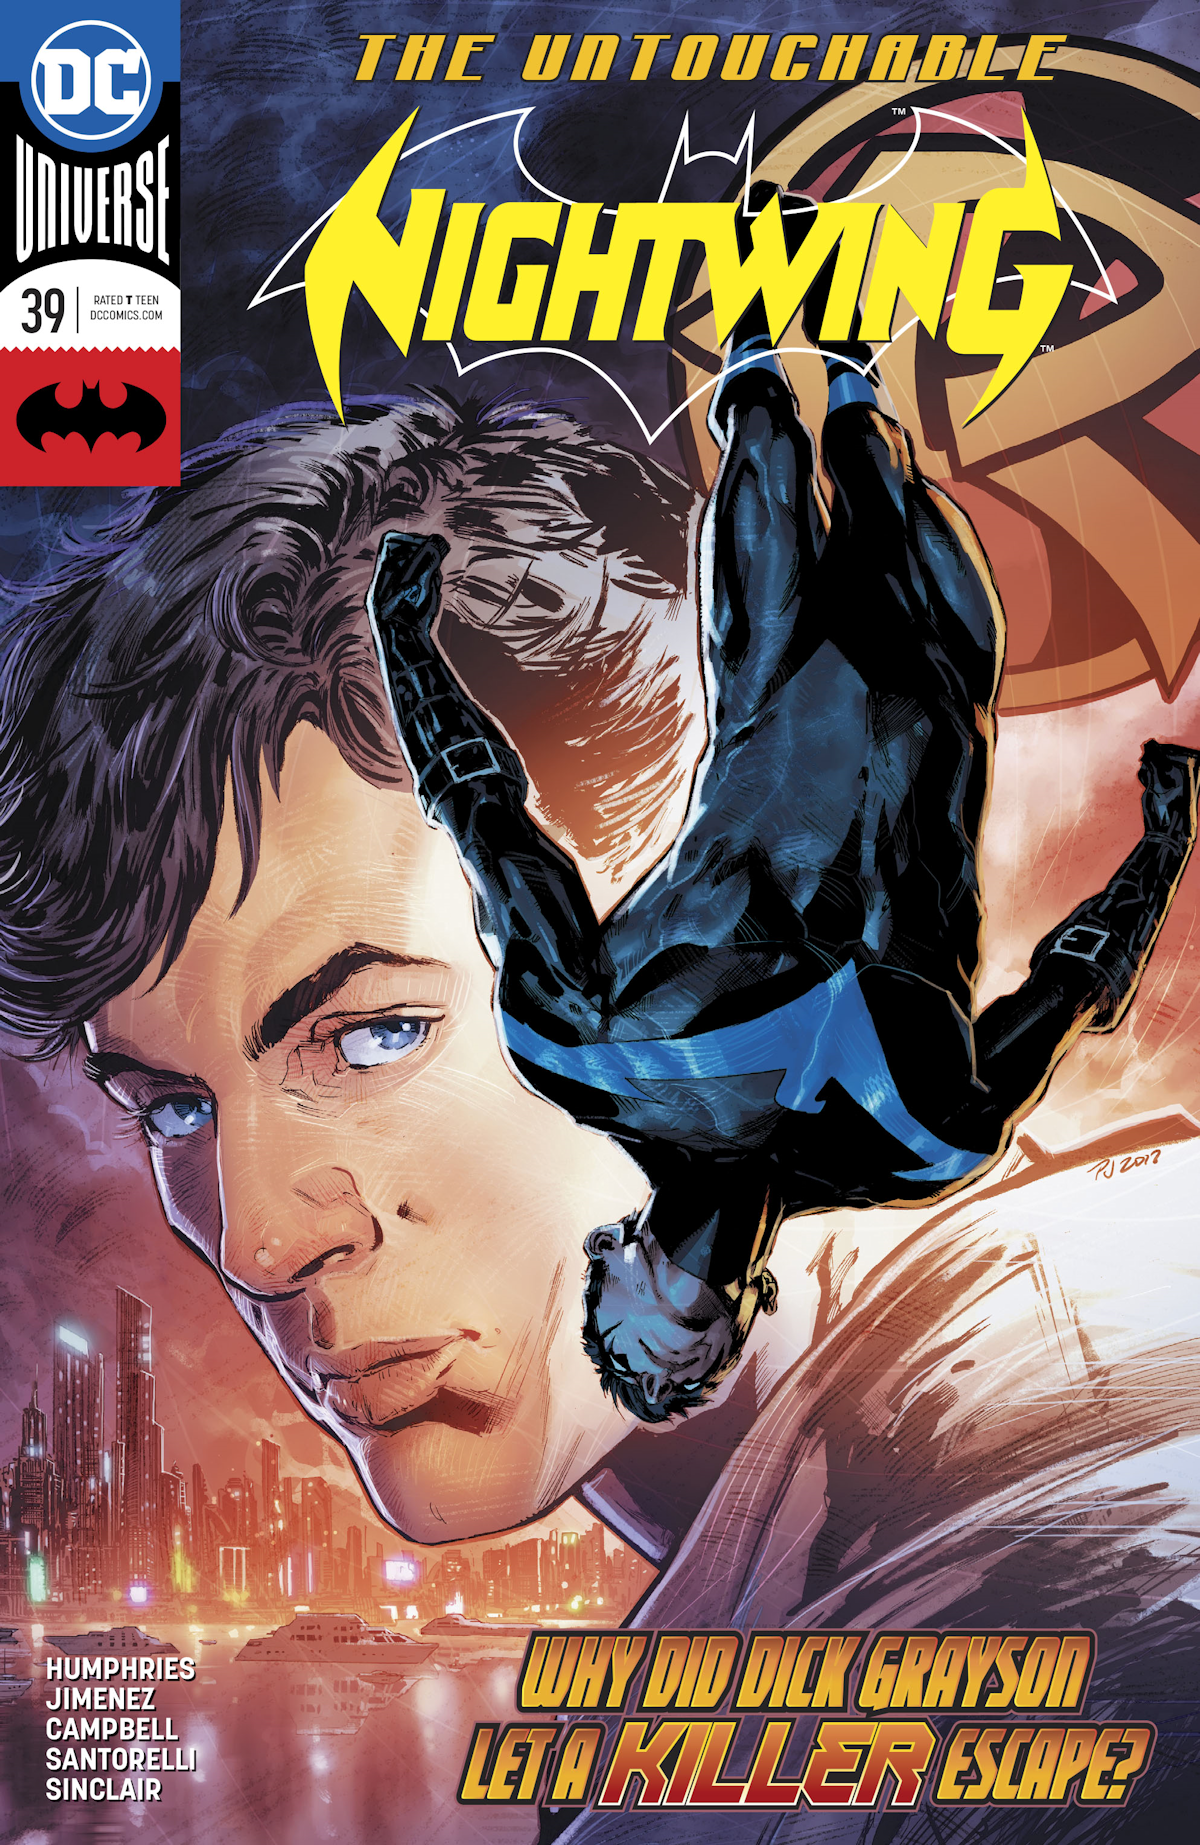 Nightwing Vol. 4 39 (Cover A)